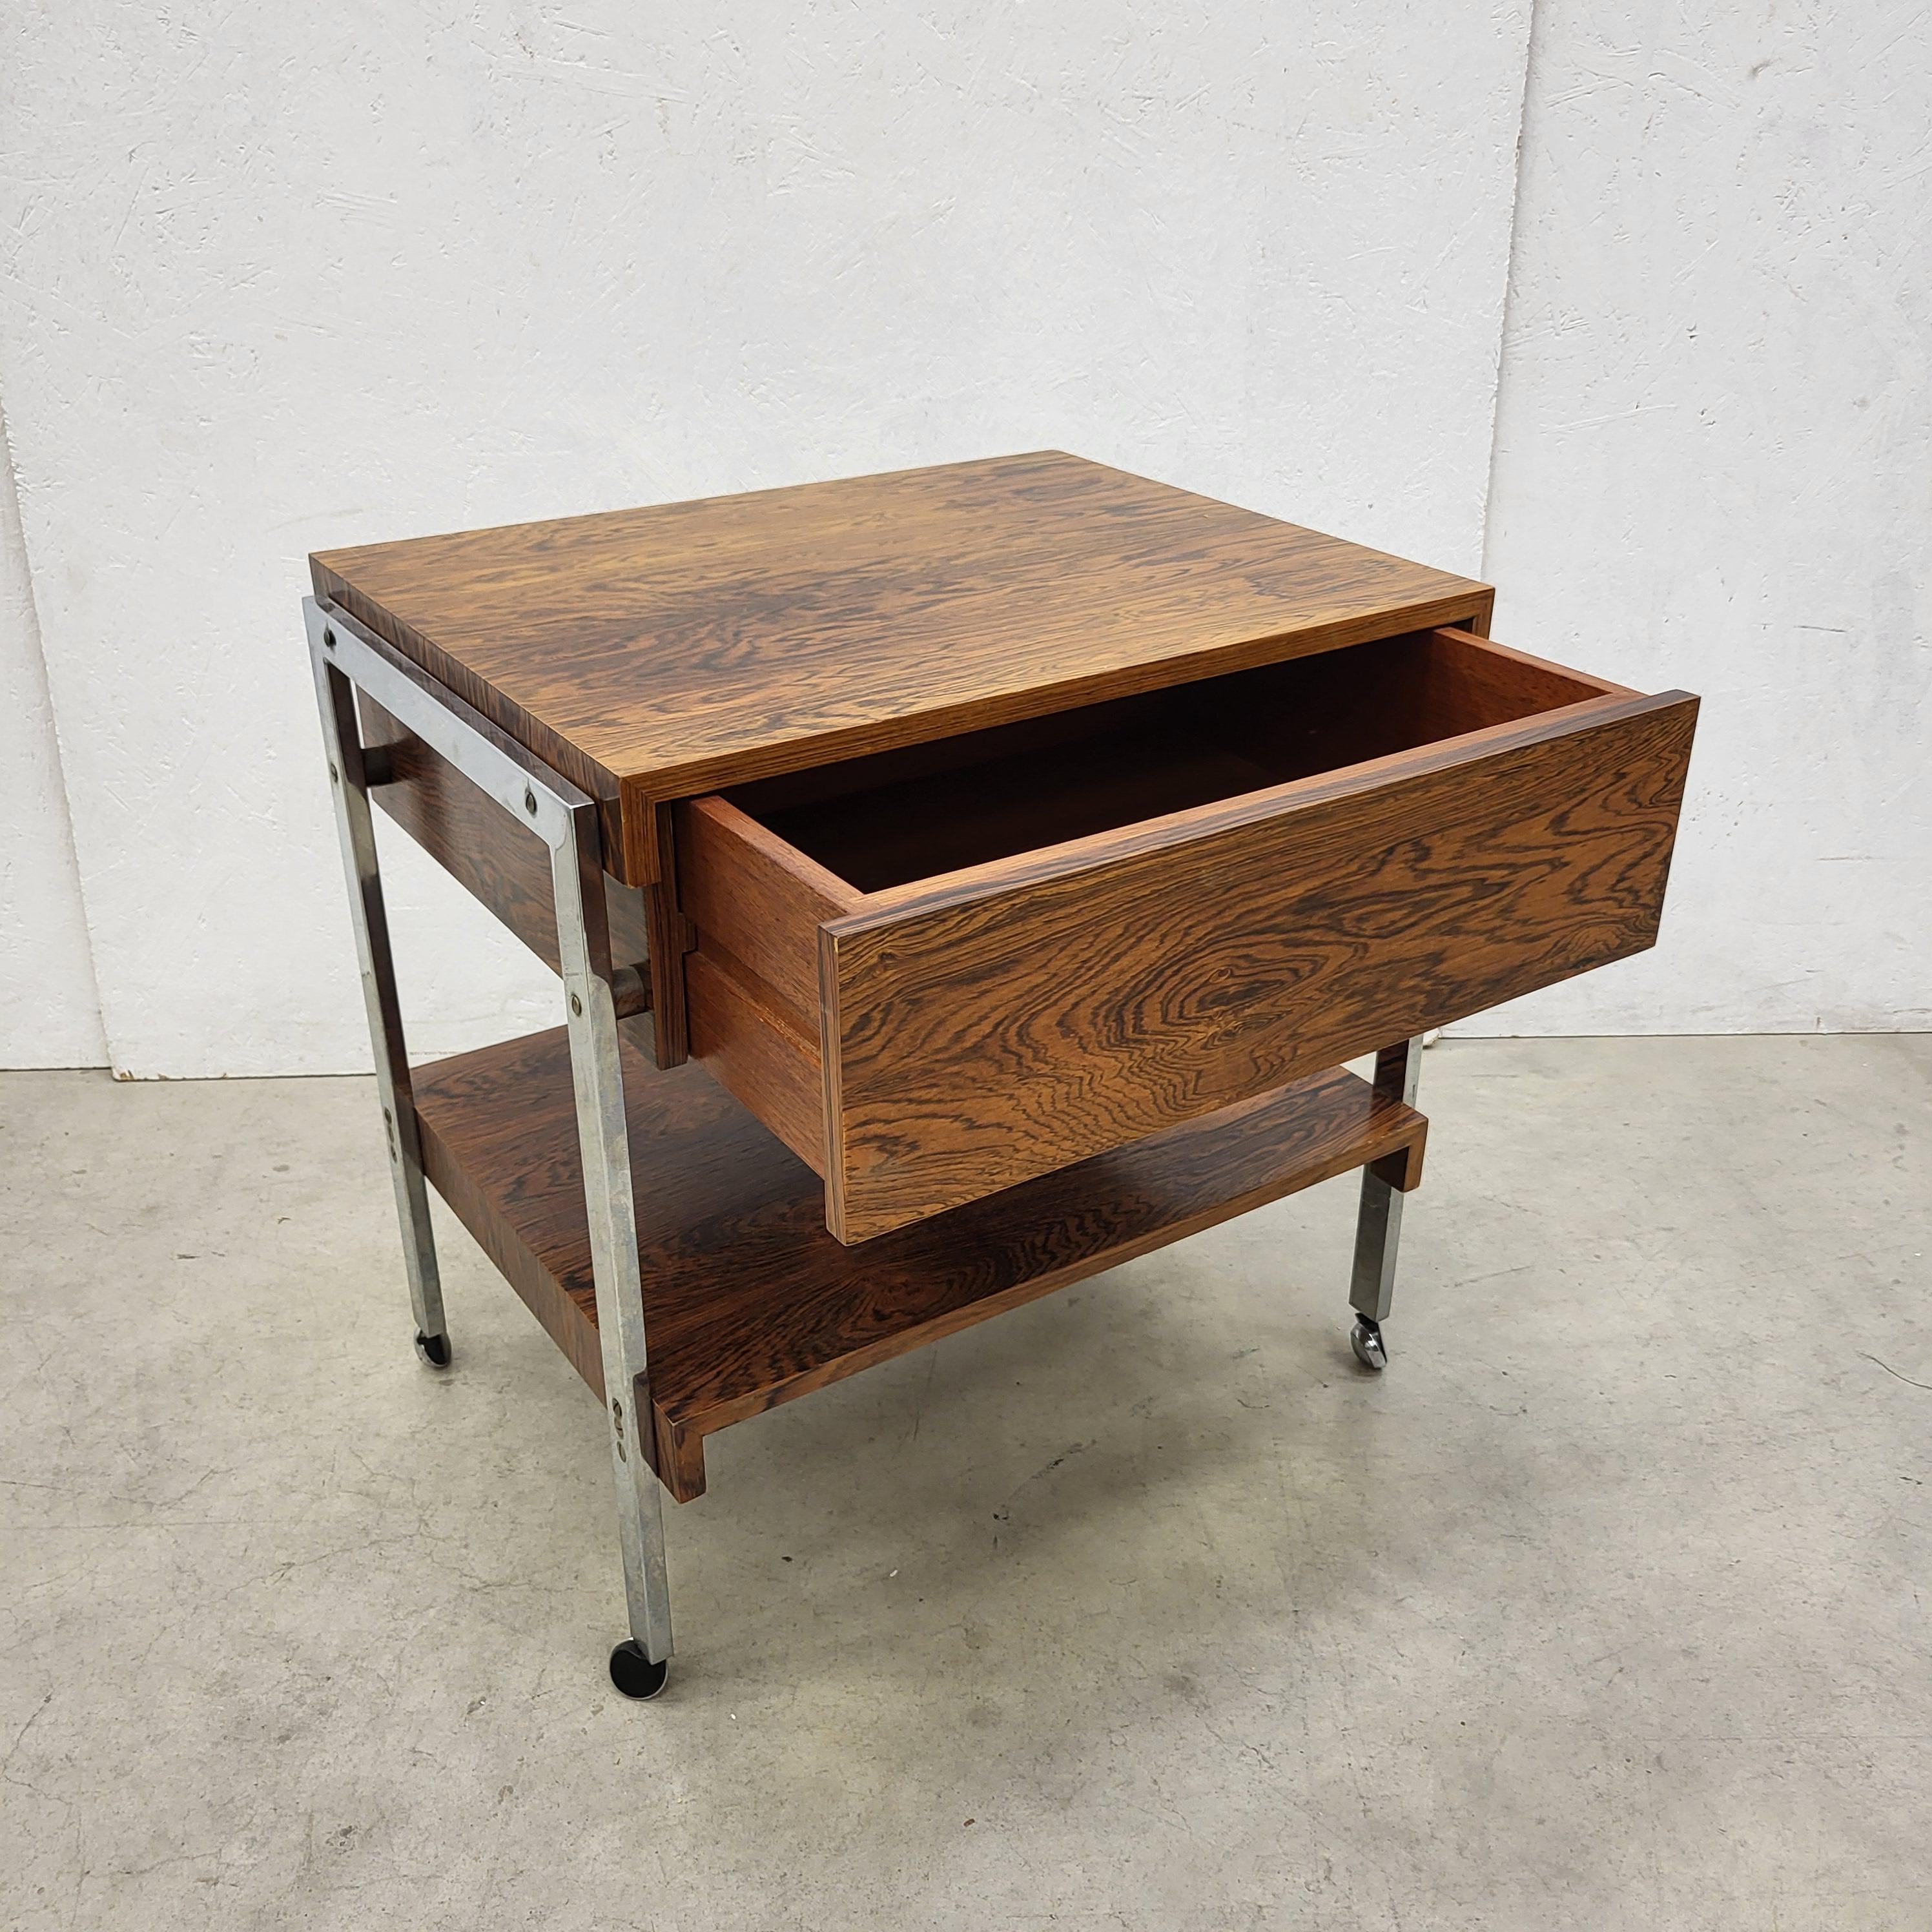 Rare midcentury cabinet trolley by Bodil Kjaer for E. Pederson Son.
Designed in 1959 and made in Denmark in a very low production line in the late 50s, early 60s.

Impressive veneer & wood structure. Stunning piece!
Reduced design made with highest